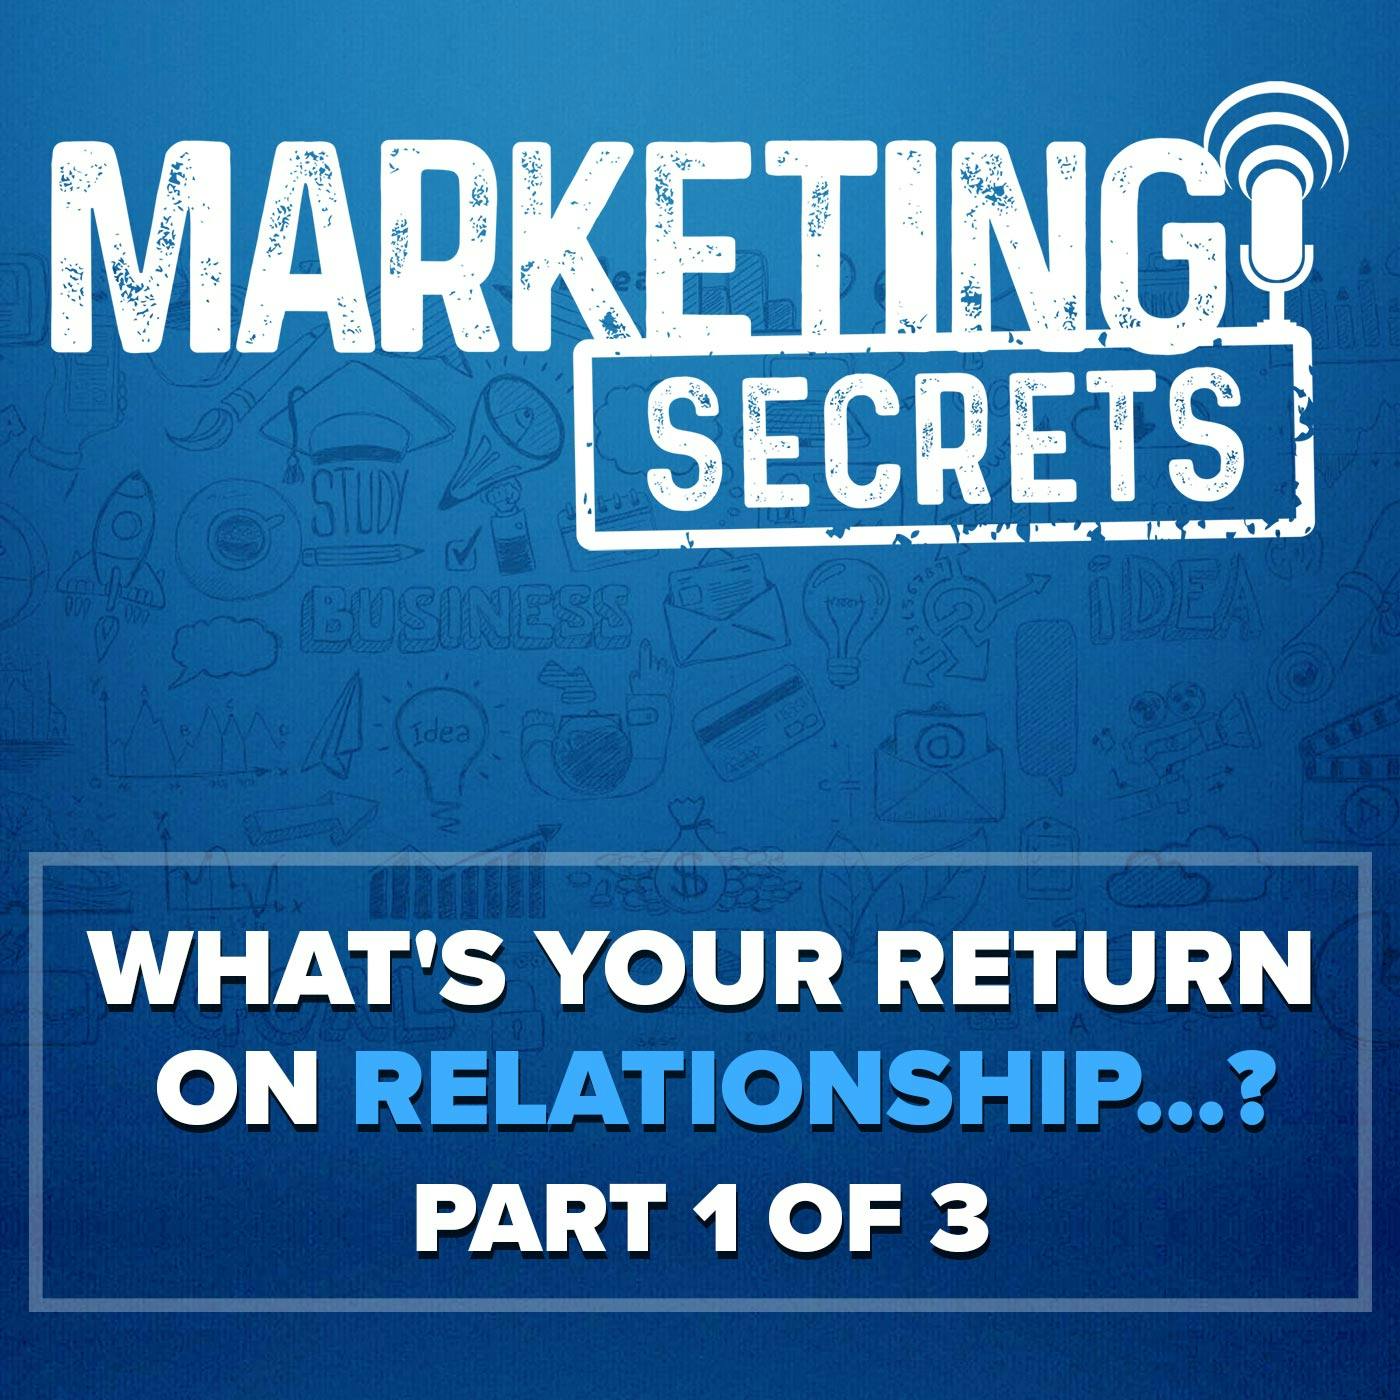 What's Your Return On Relationship...? (1 of 3)